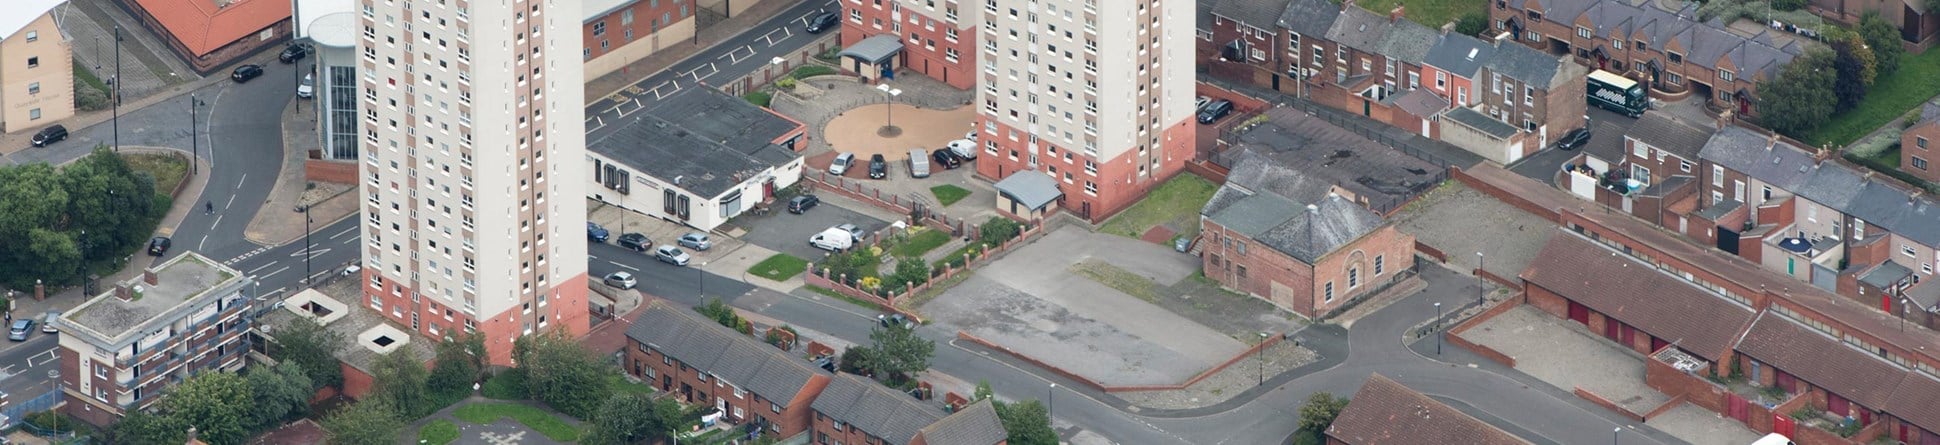 Aerial view of Phoenix Hall and three nearby tower blocks in Sunderland. The top left corner shows the shoreline and boats.